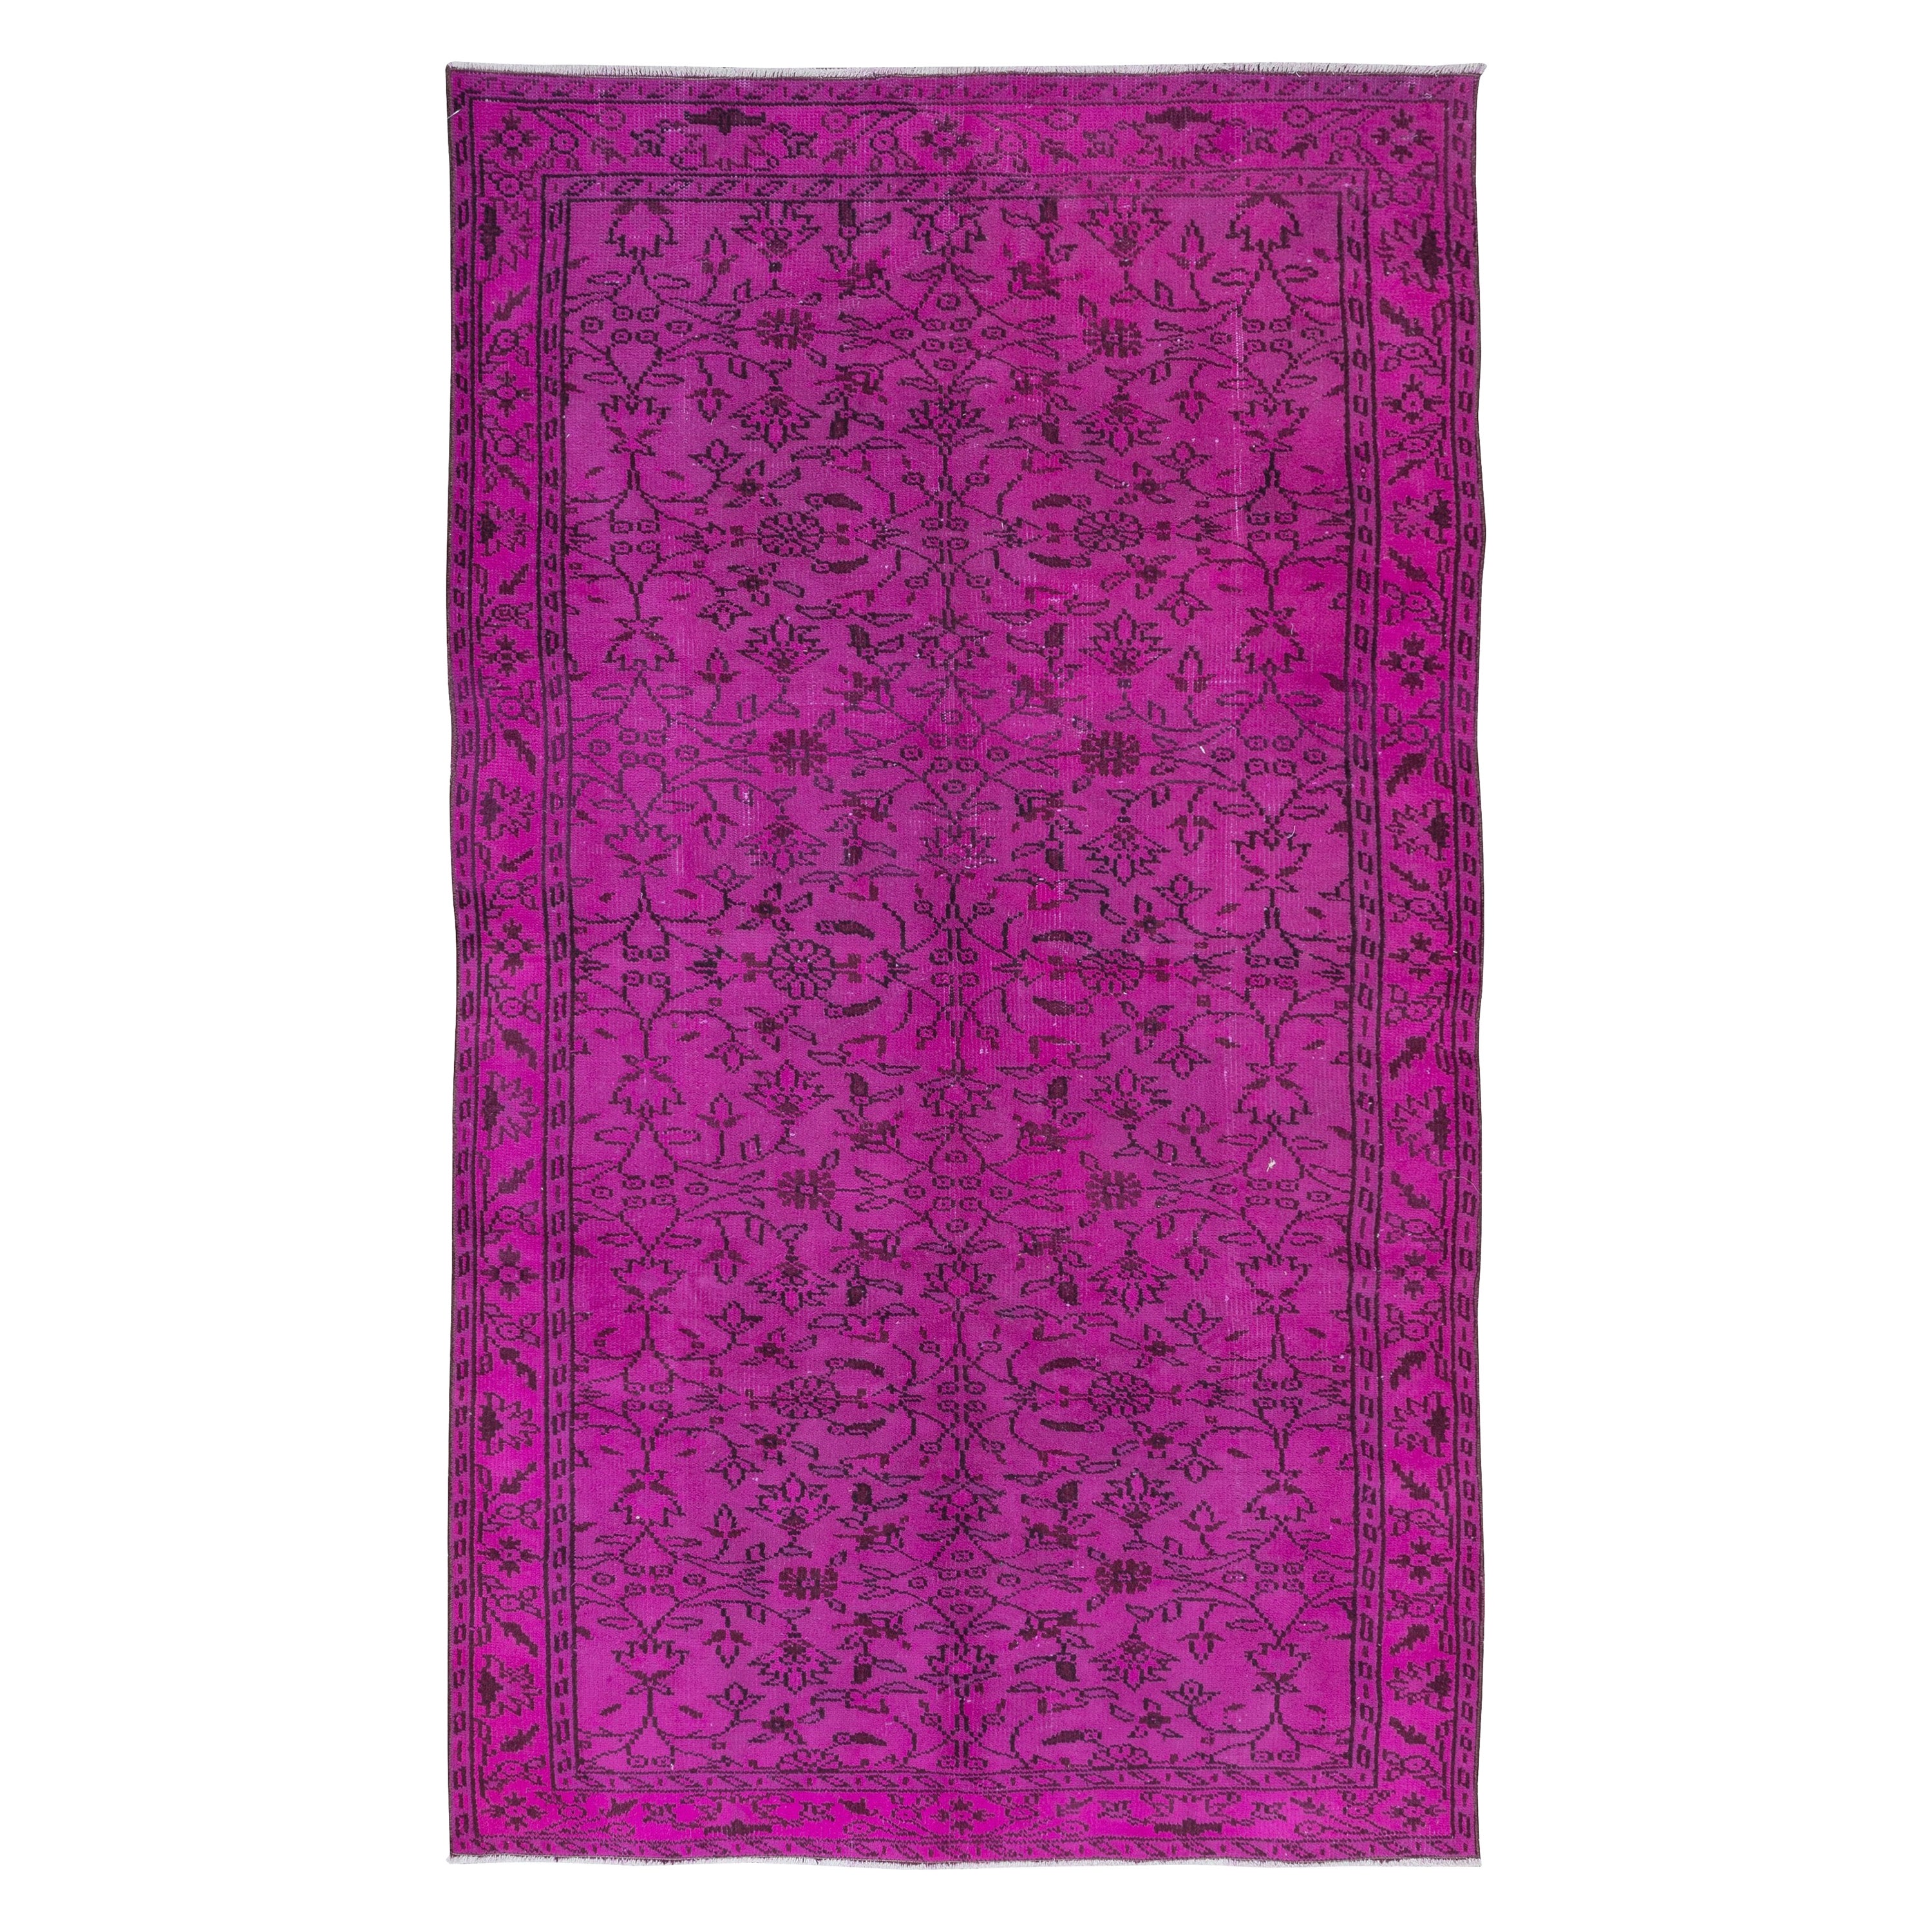 5.5x8.7 Ft Modern Floral Pattern Rug in Pink, Handwoven & Handknotted in Turkey For Sale